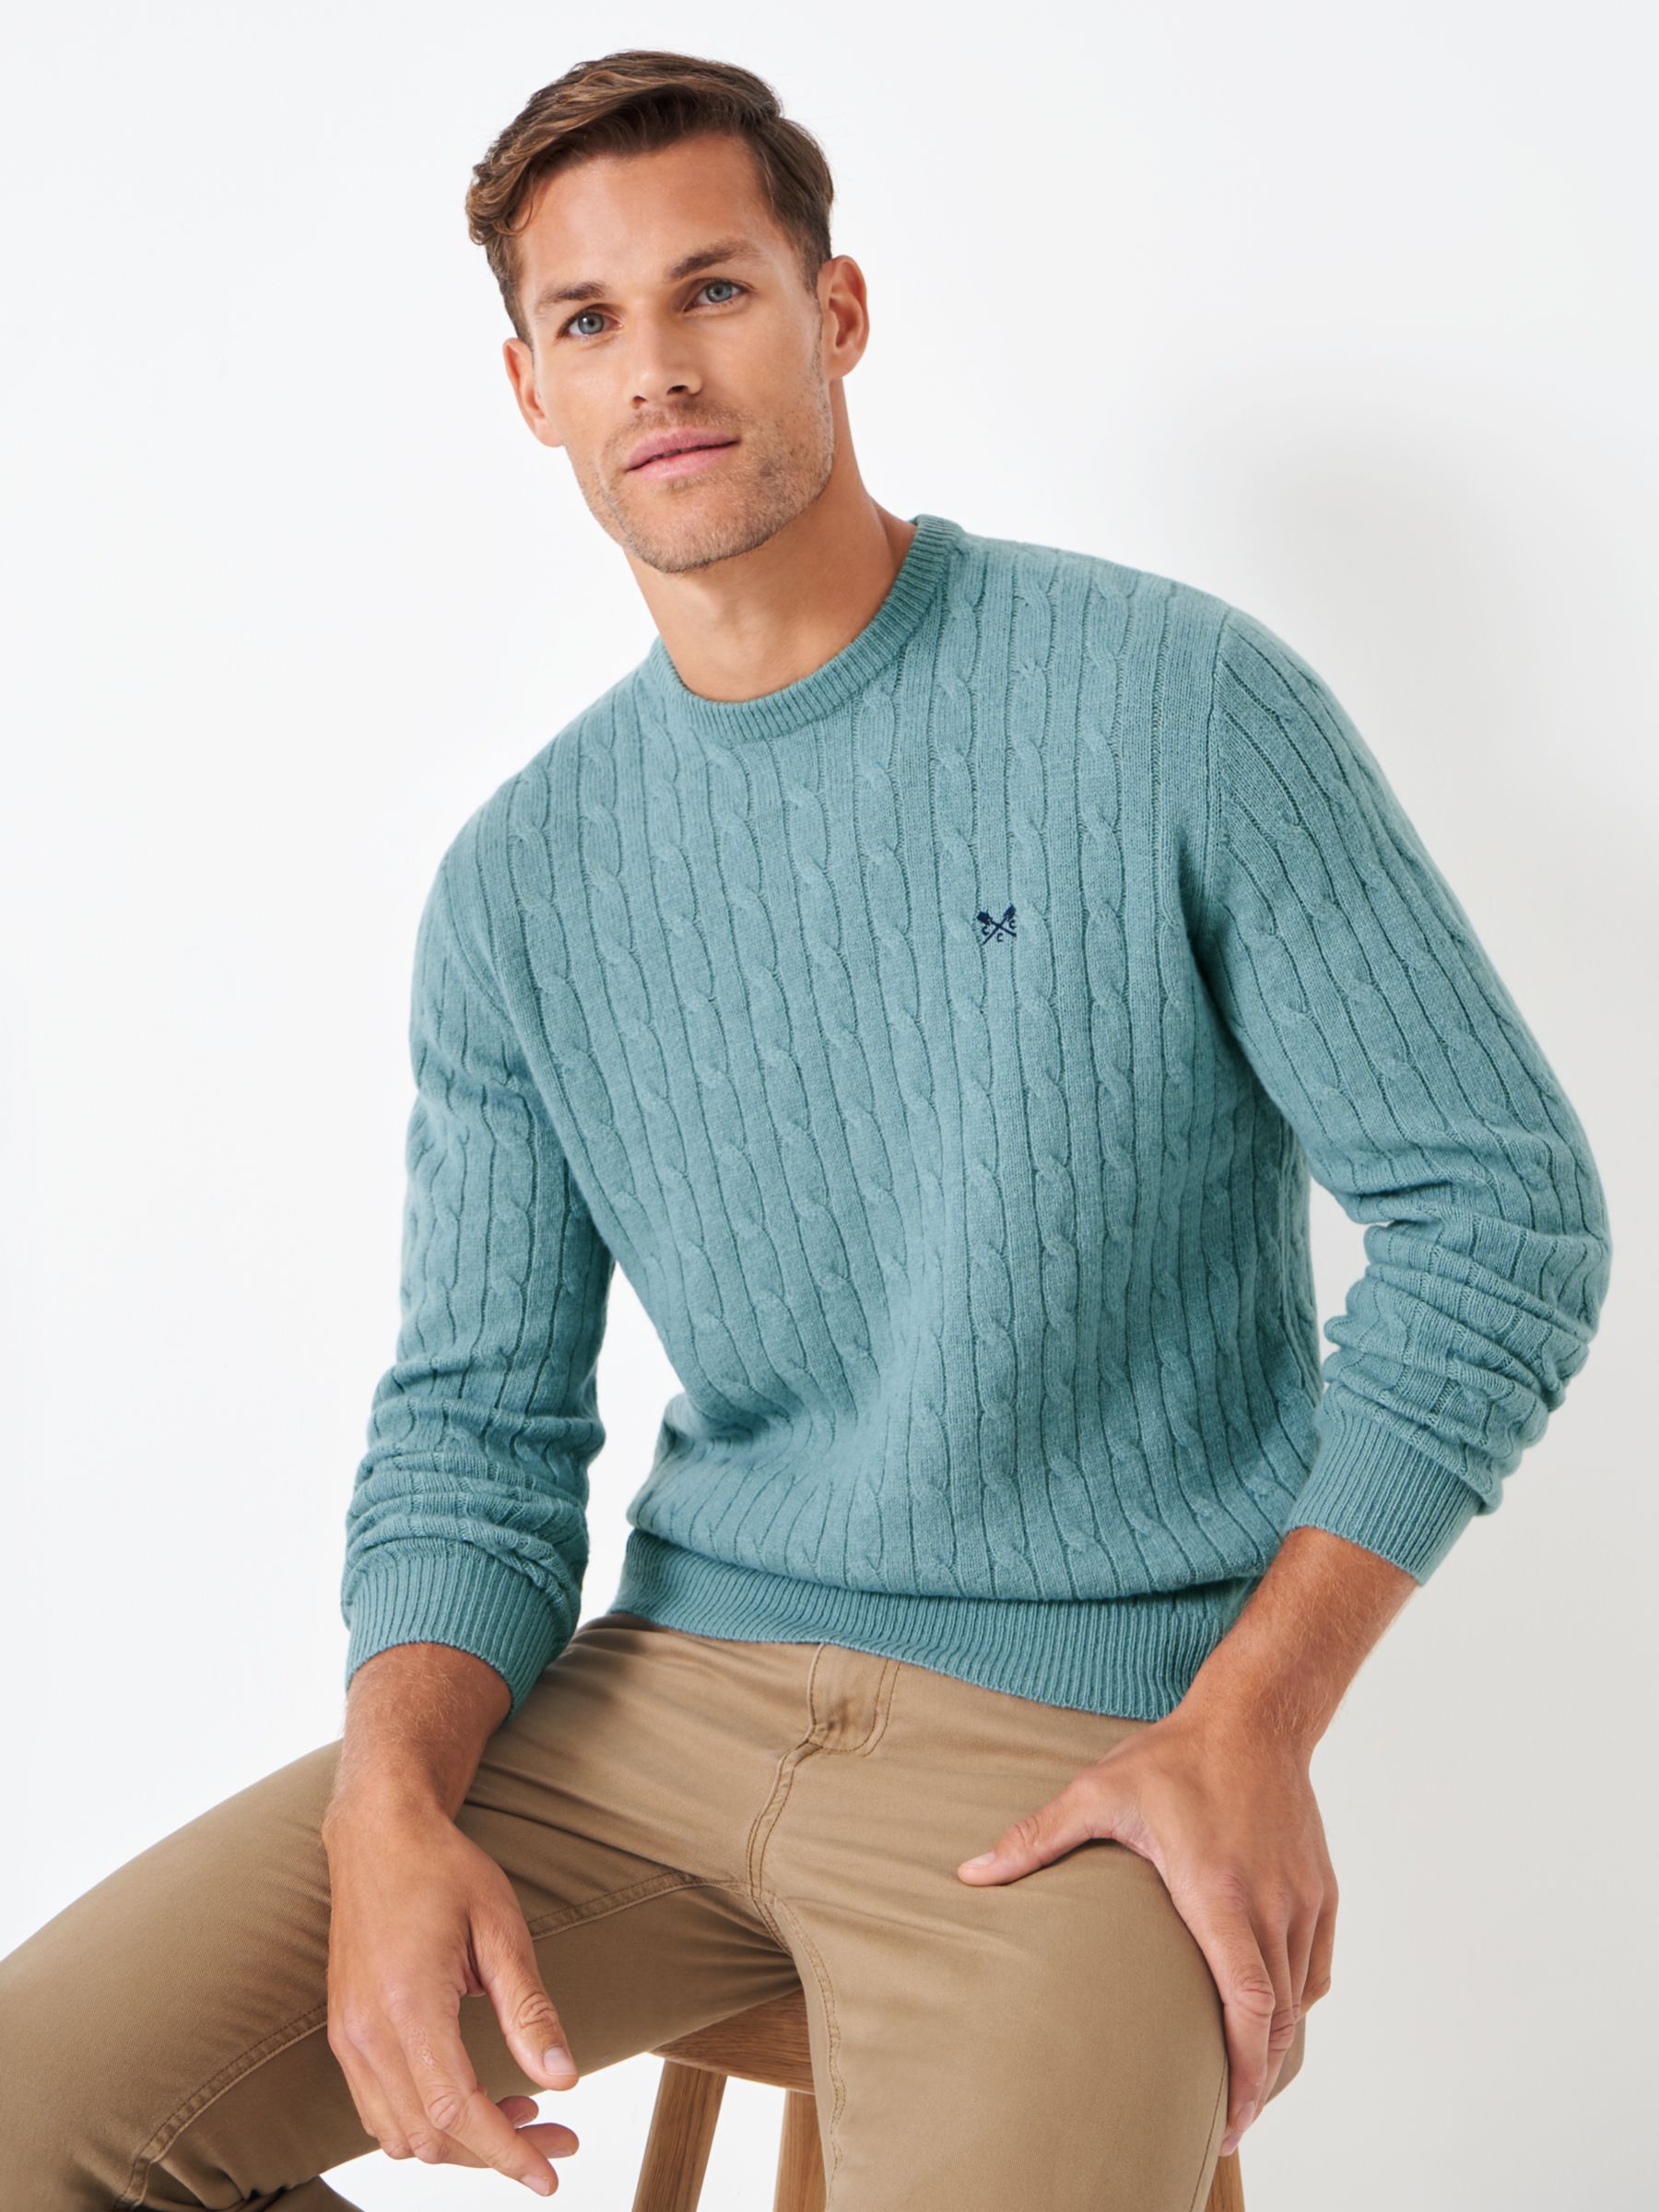 Buy Crew Clothing Lambswool Blend Cable Knit Crew Neck Jumper Online at johnlewis.com